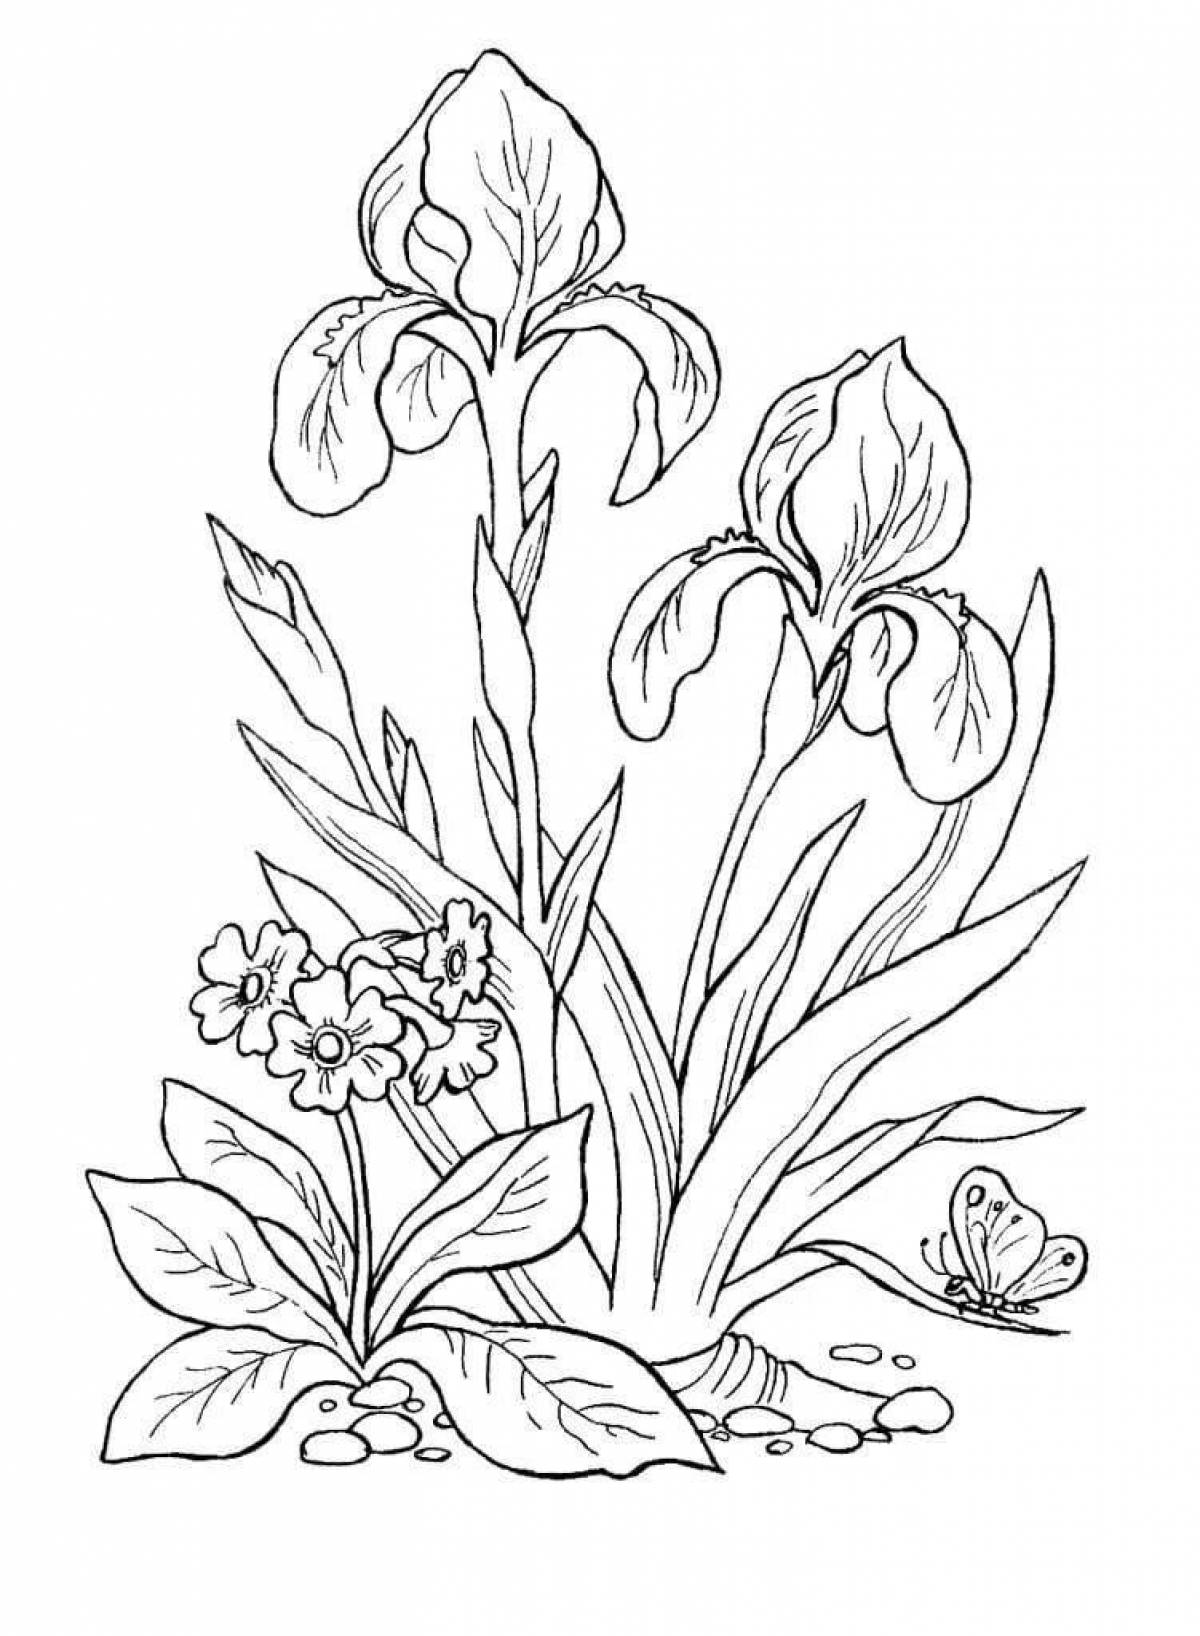 Colouring funny spring flowers